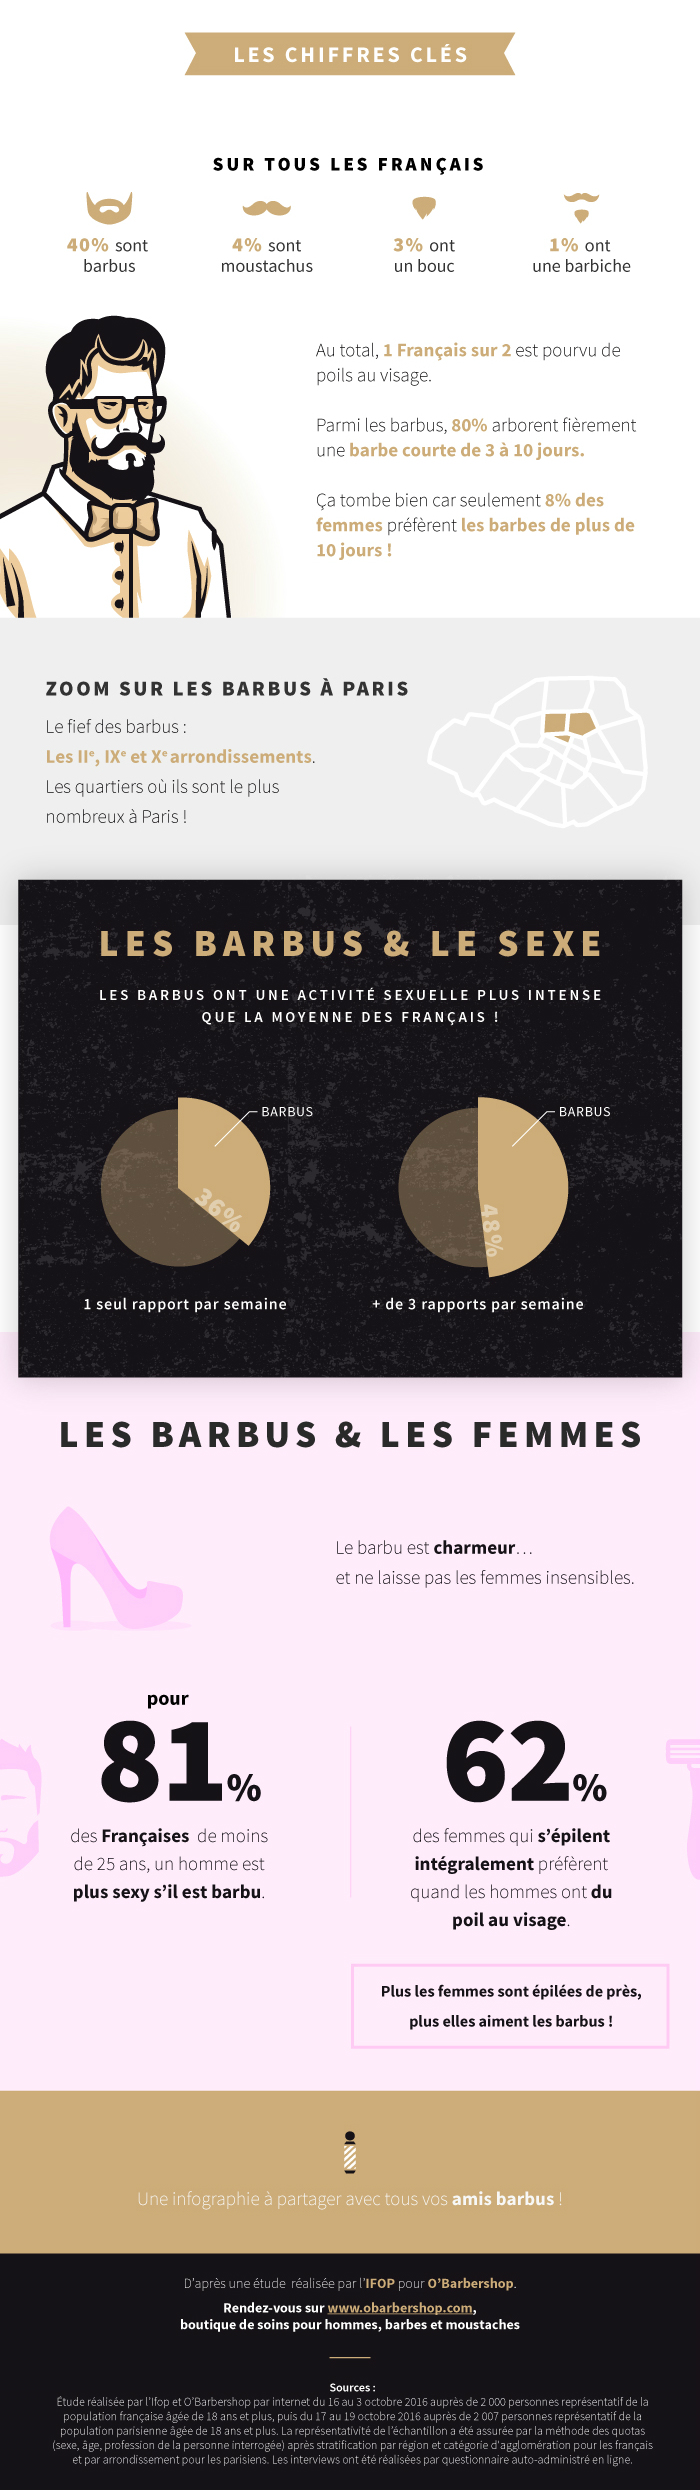 infographie_obarber_ifop_b